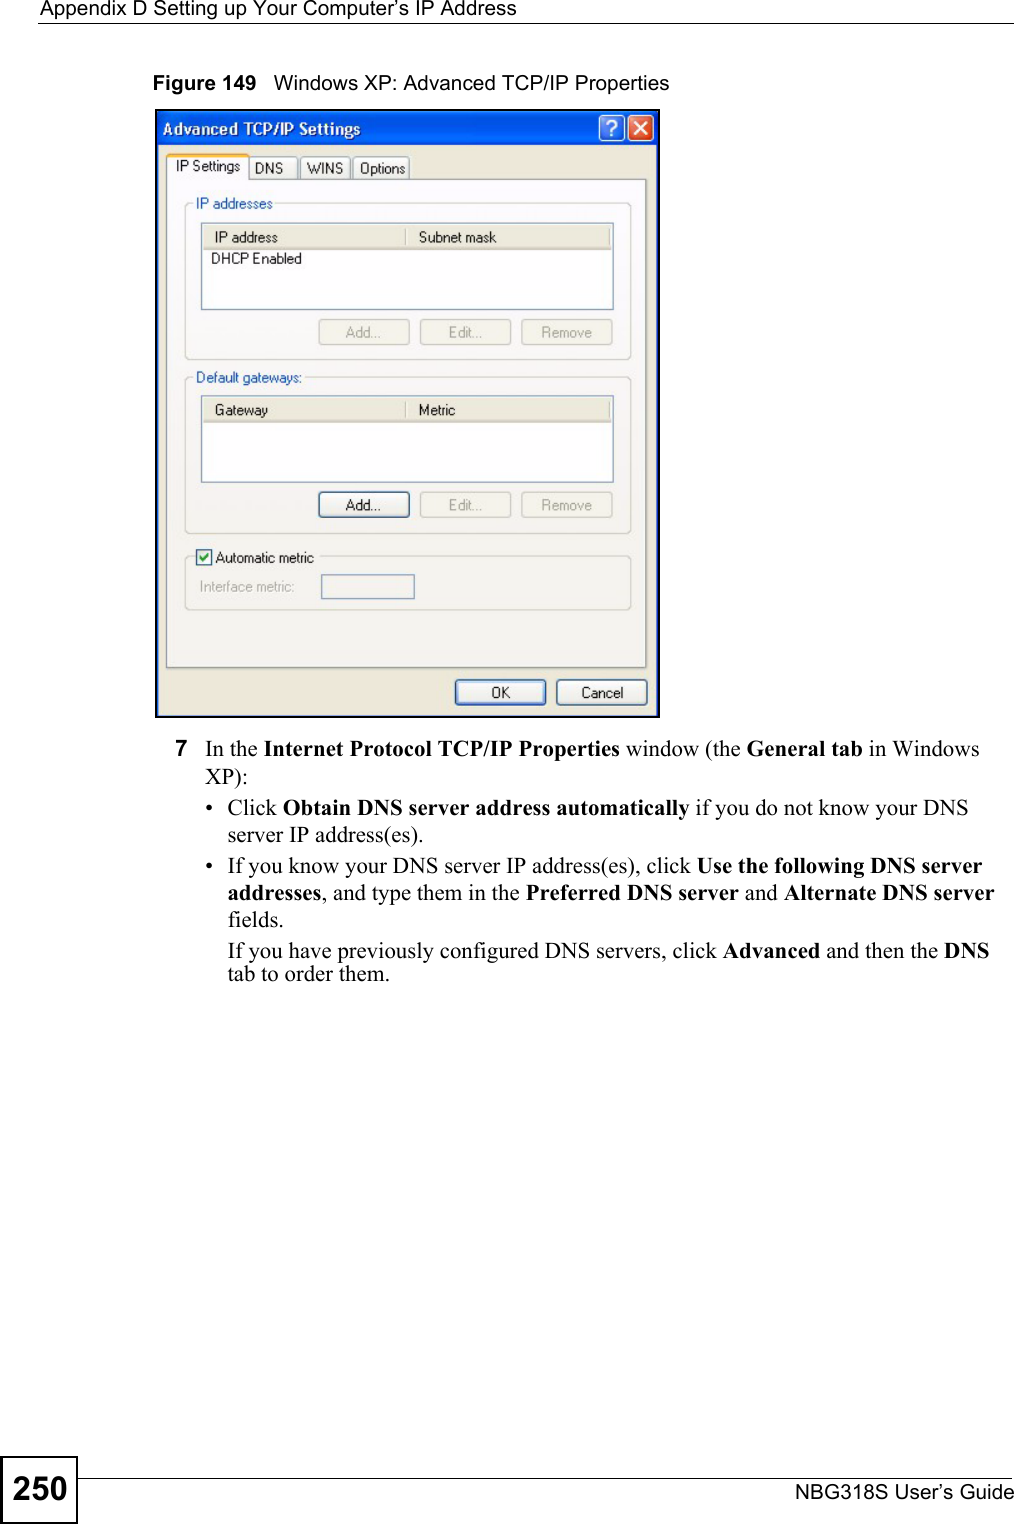 Appendix D Setting up Your Computer’s IP AddressNBG318S User’s Guide250Figure 149   Windows XP: Advanced TCP/IP Properties7In the Internet Protocol TCP/IP Properties window (the General tab in Windows XP):• Click Obtain DNS server address automatically if you do not know your DNS server IP address(es).• If you know your DNS server IP address(es), click Use the following DNS server addresses, and type them in the Preferred DNS server and Alternate DNS server fields. If you have previously configured DNS servers, click Advanced and then the DNS tab to order them.